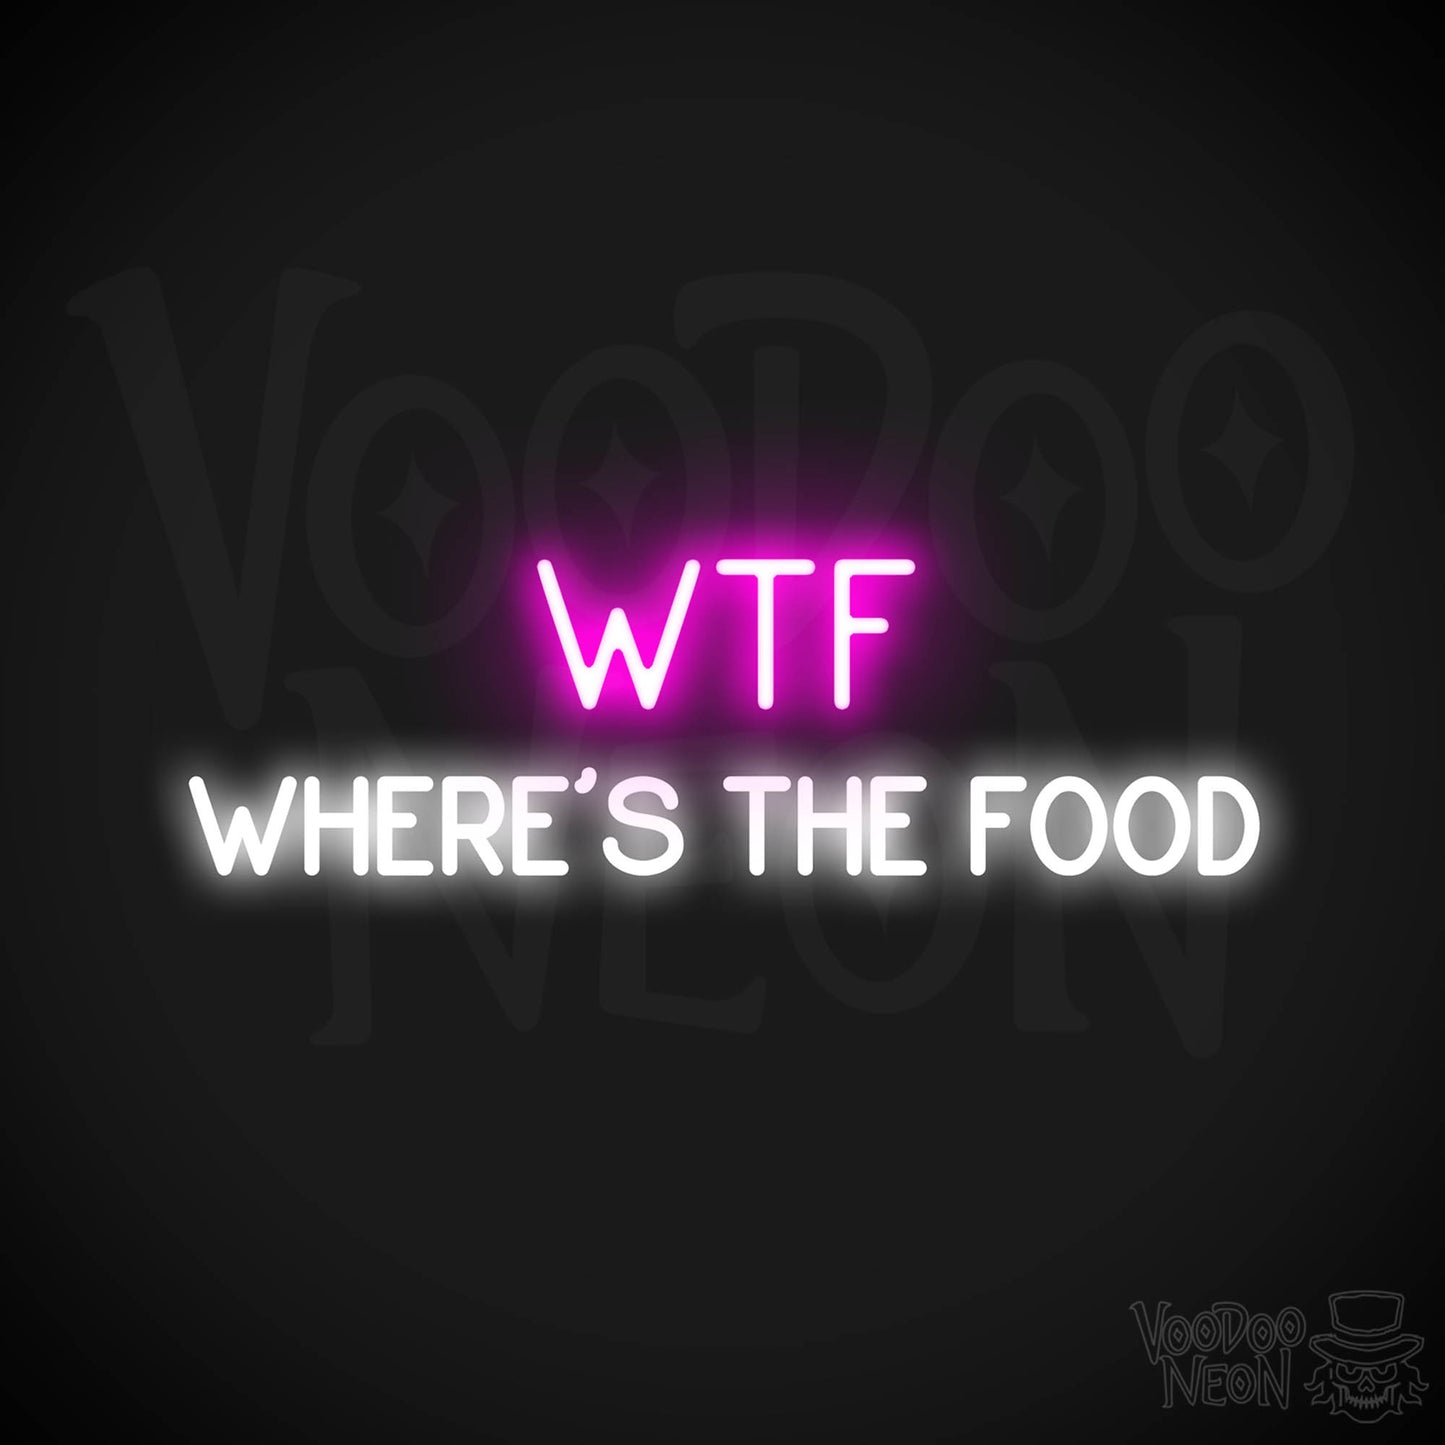 Wtf (Wheres The Food) LED Neon - Multi-Color